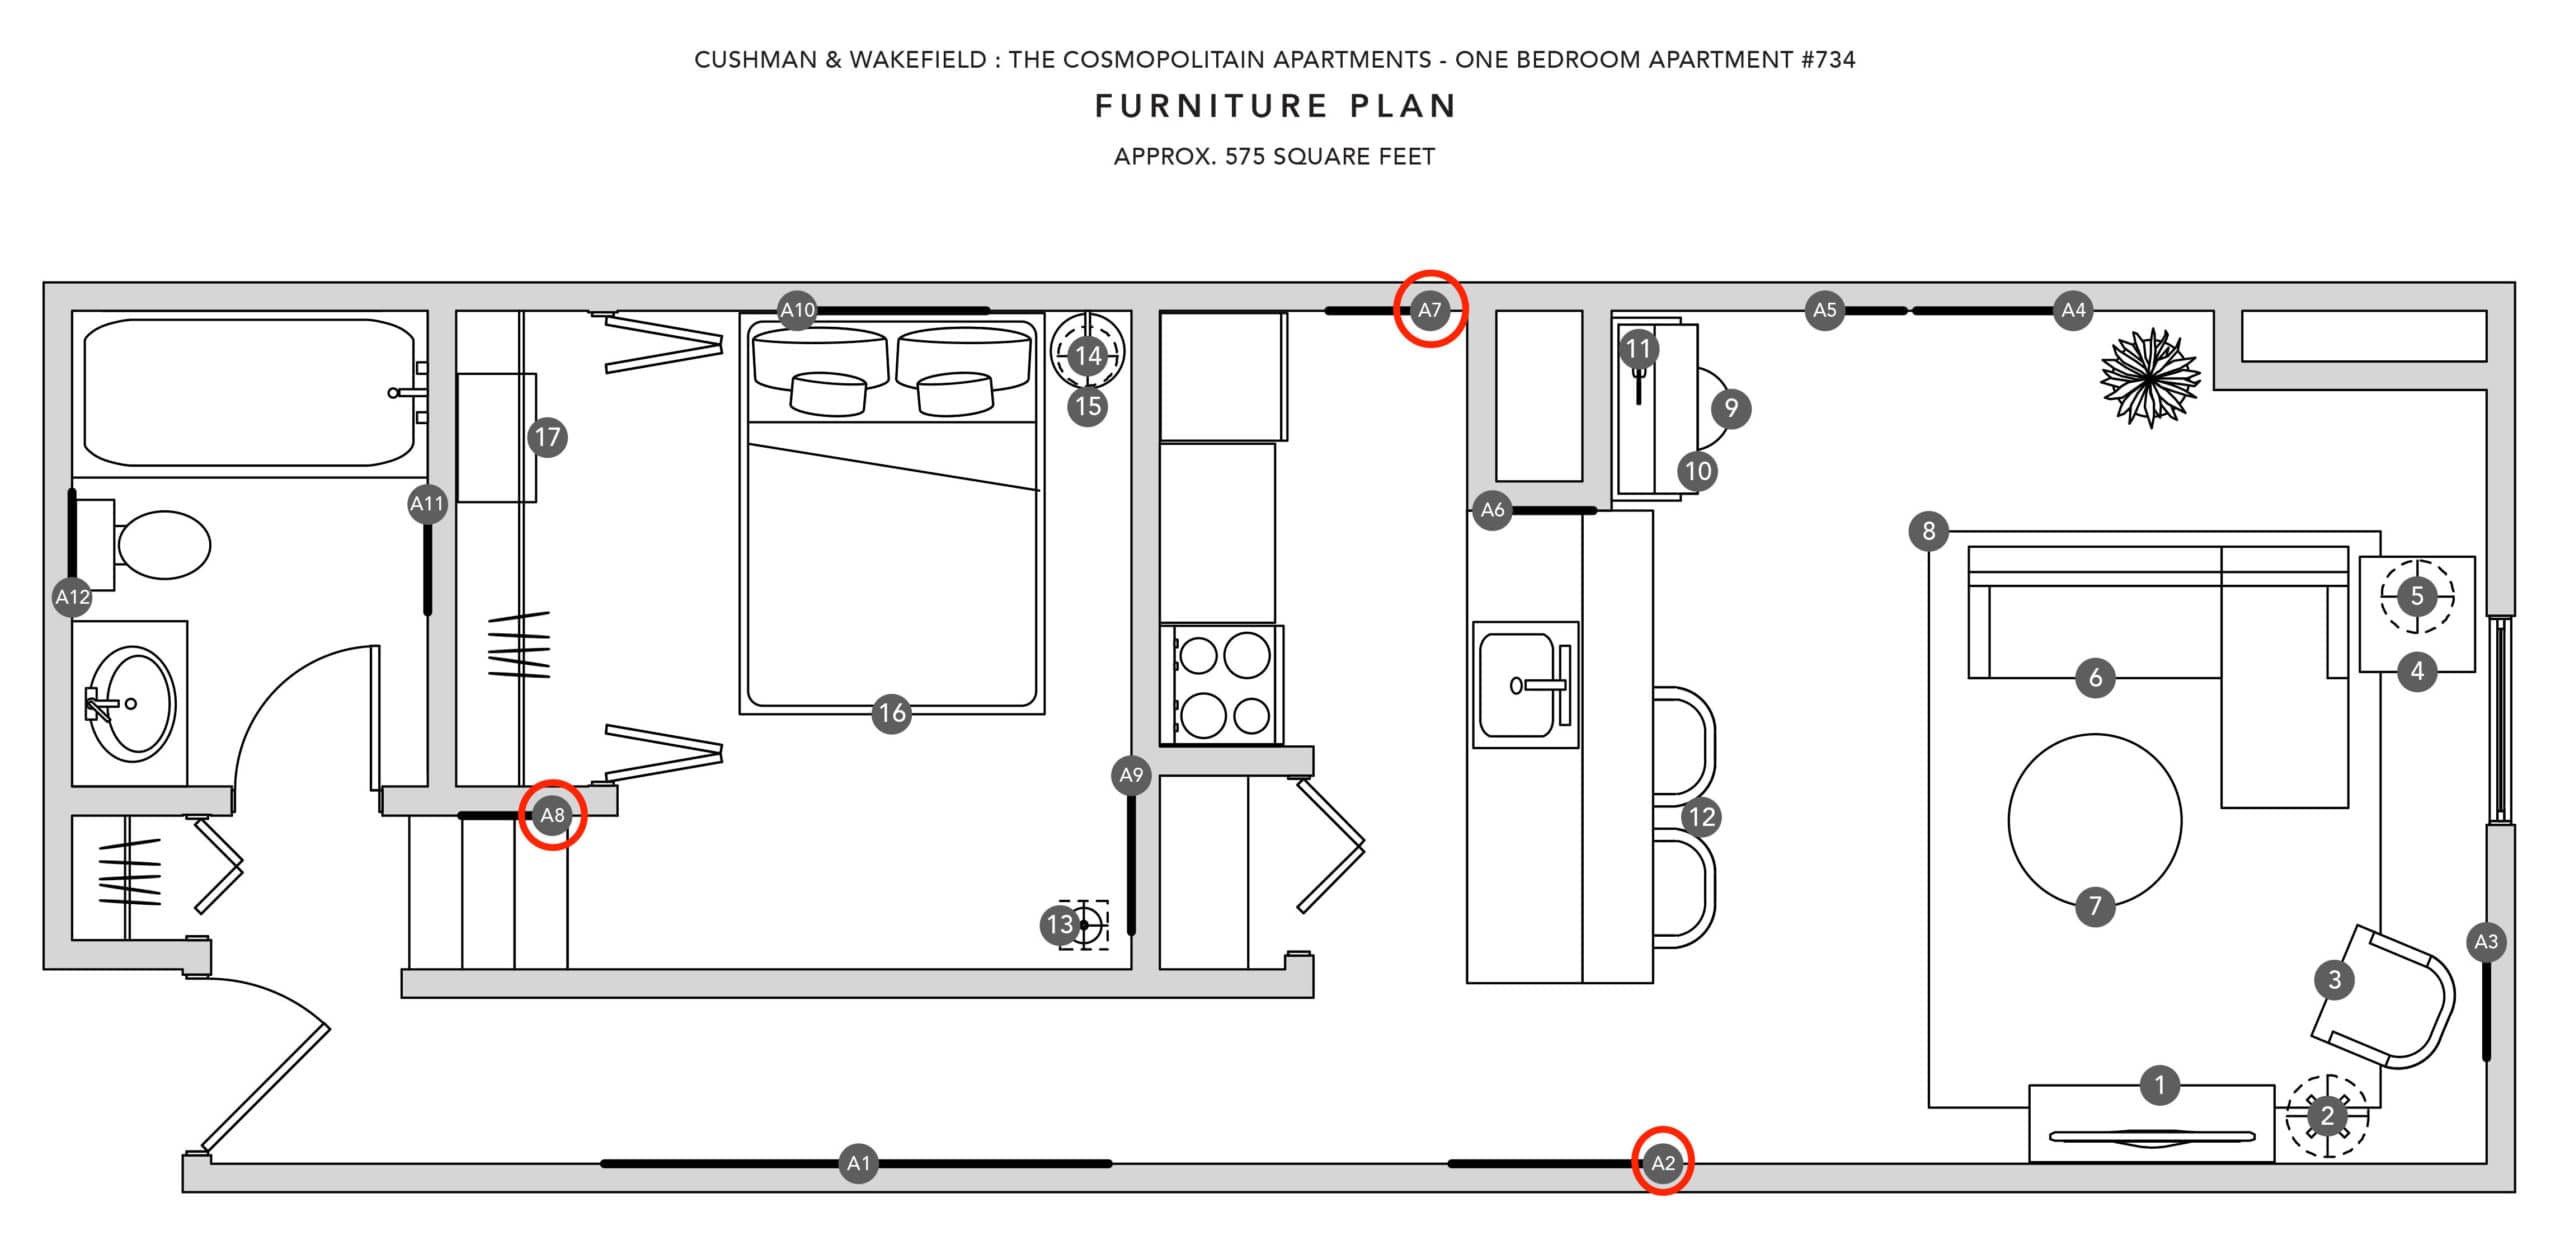 Furniture Plan for One Bedroom Apartment at The Cosmopolitan